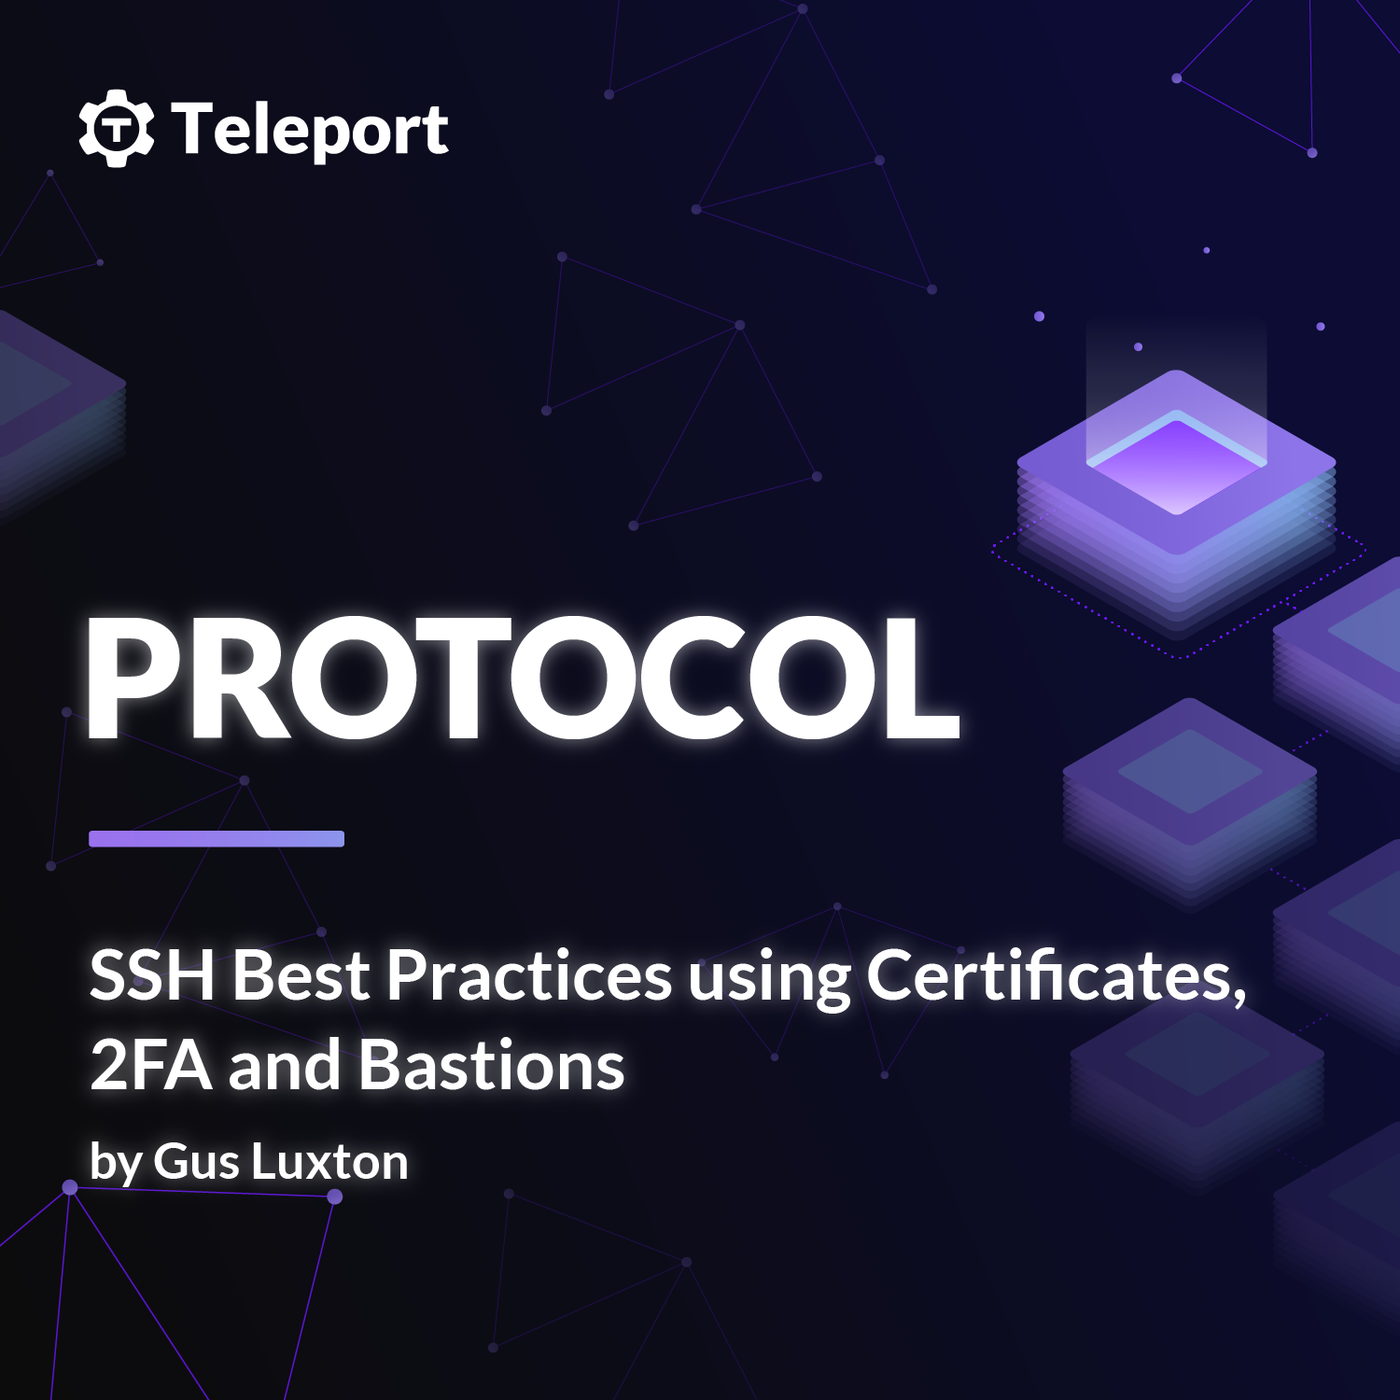 SSH Best Practices using Certificates, 2FA and Bastions